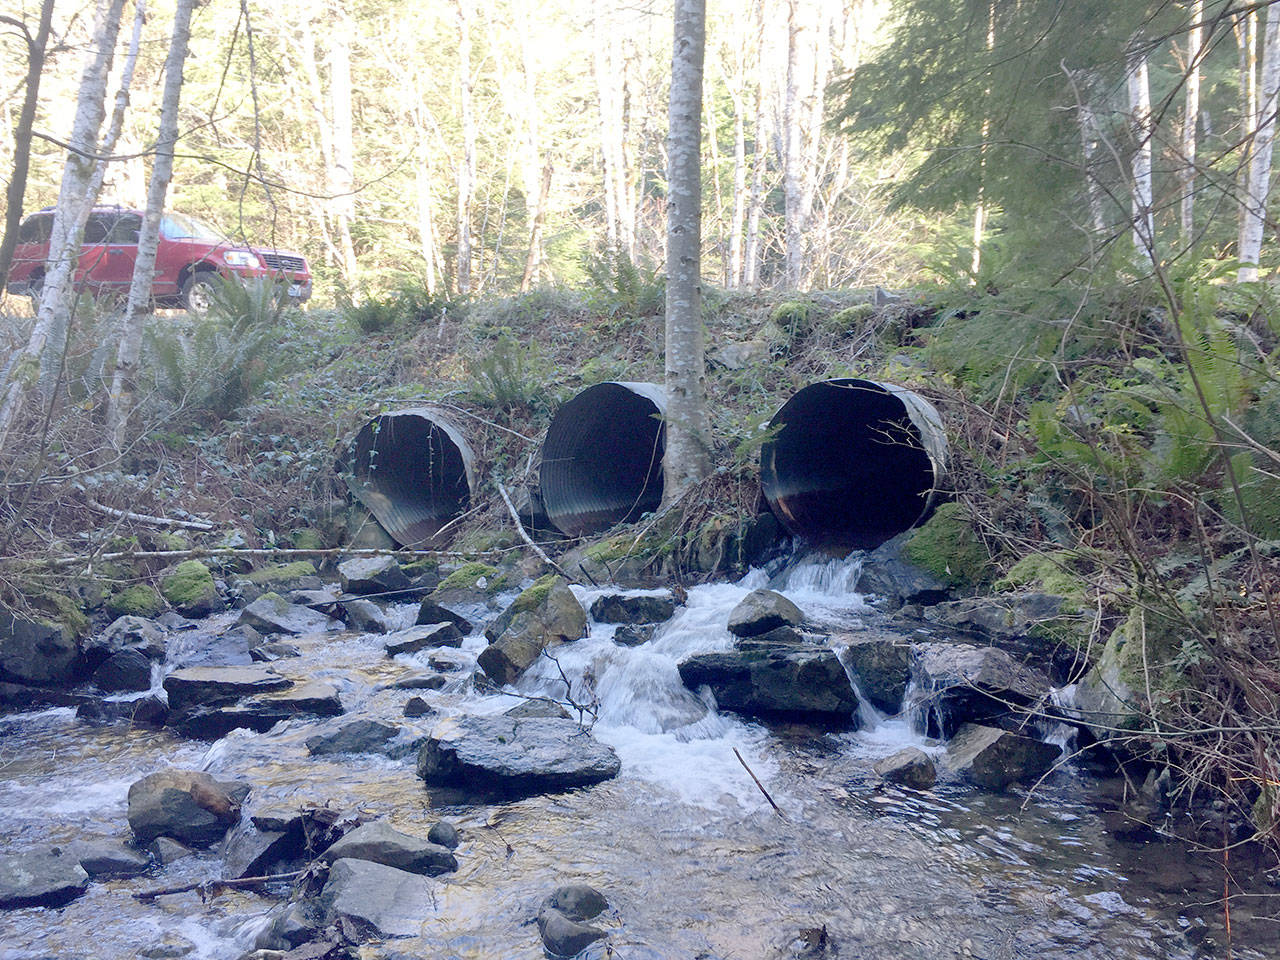 An example of a under-road passage way for river water along Grouse Ridge Road, just outside of North Bend. Courtesy Photo